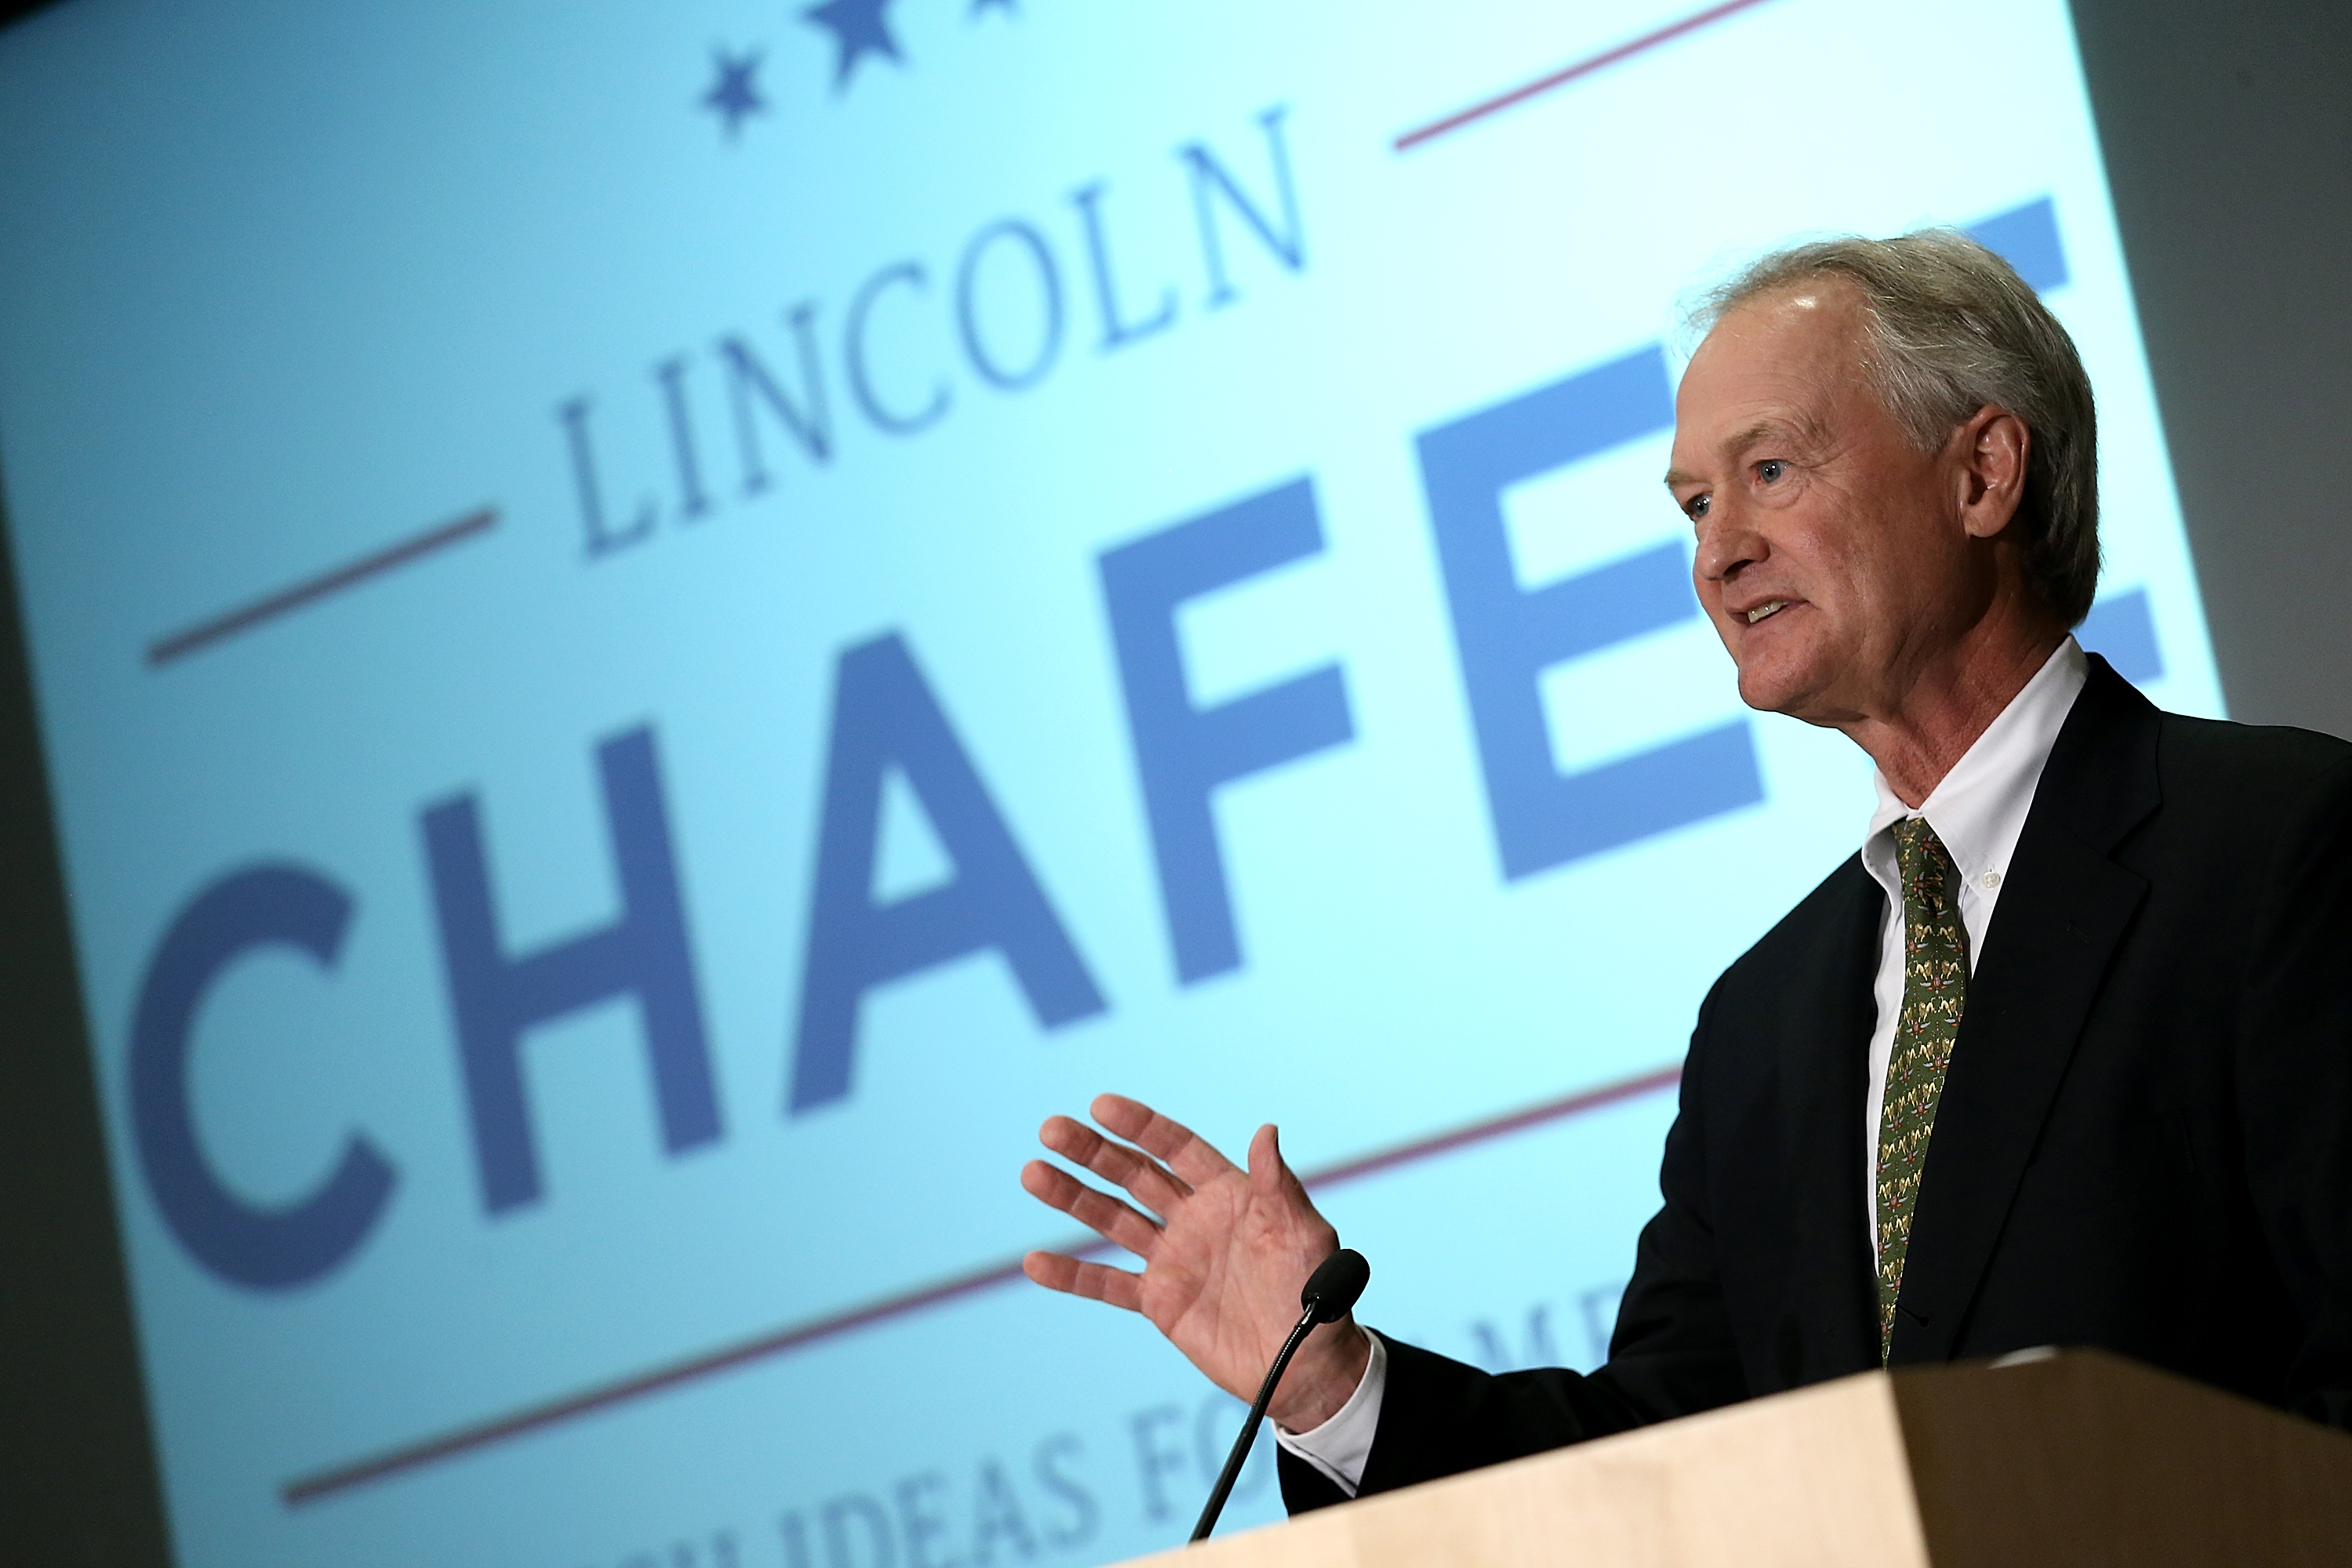 Democratic presidential candidate and former Sen. Lincoln Chafee (D-RI) announces his candidacy for the U.S. presidency at George Mason University June 3, 2015 in Arlington, Virginia. Chafee joins Hillary Clinton, Bernie Sanders and Martin O'Malley in seeking the Democratic nomination. (Win McNamee—Getty Images)